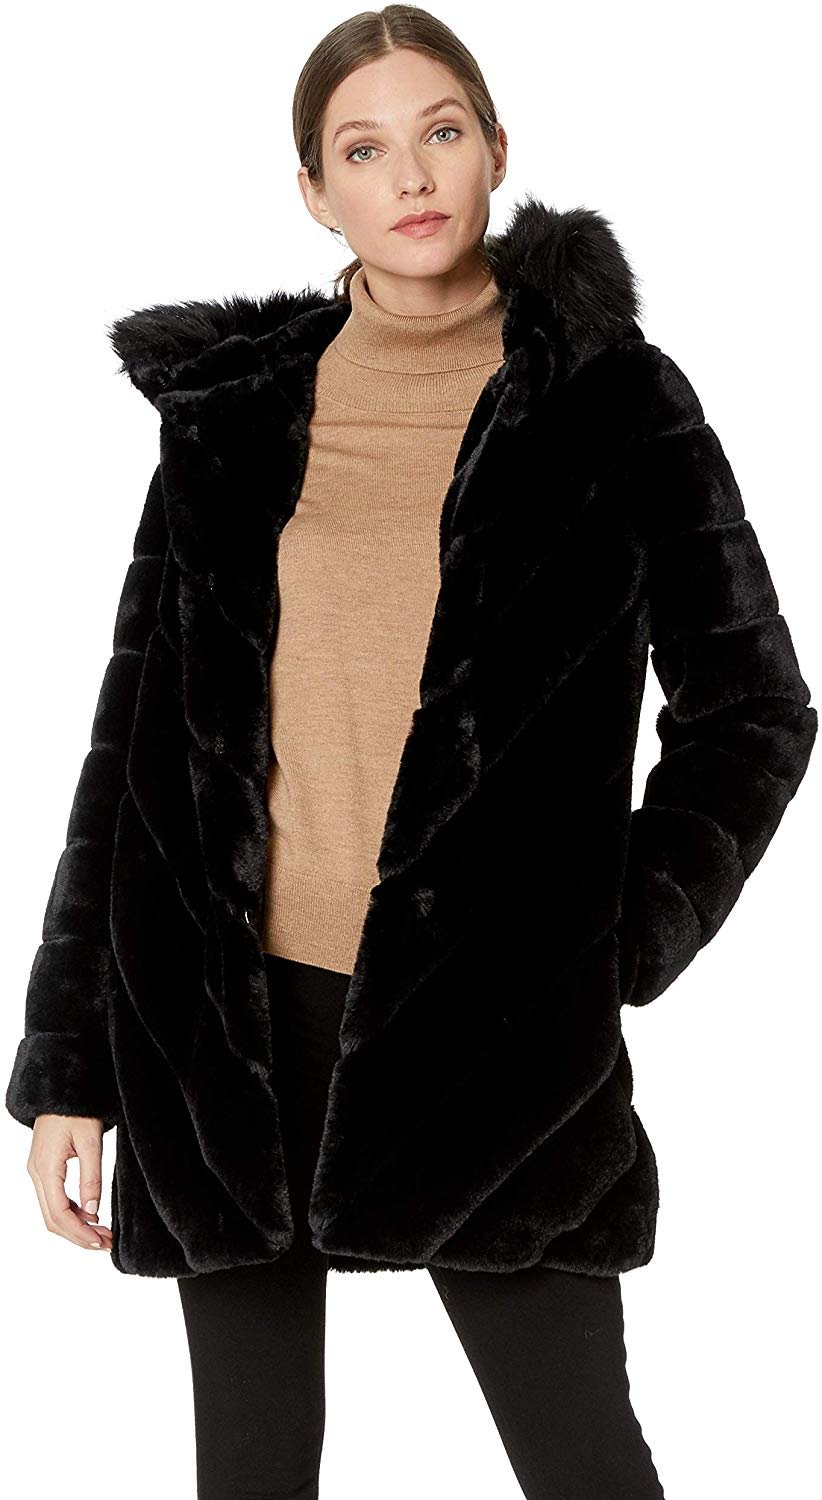 Women's Faux Fur Trimmed Collar and Diagonal Body Lines